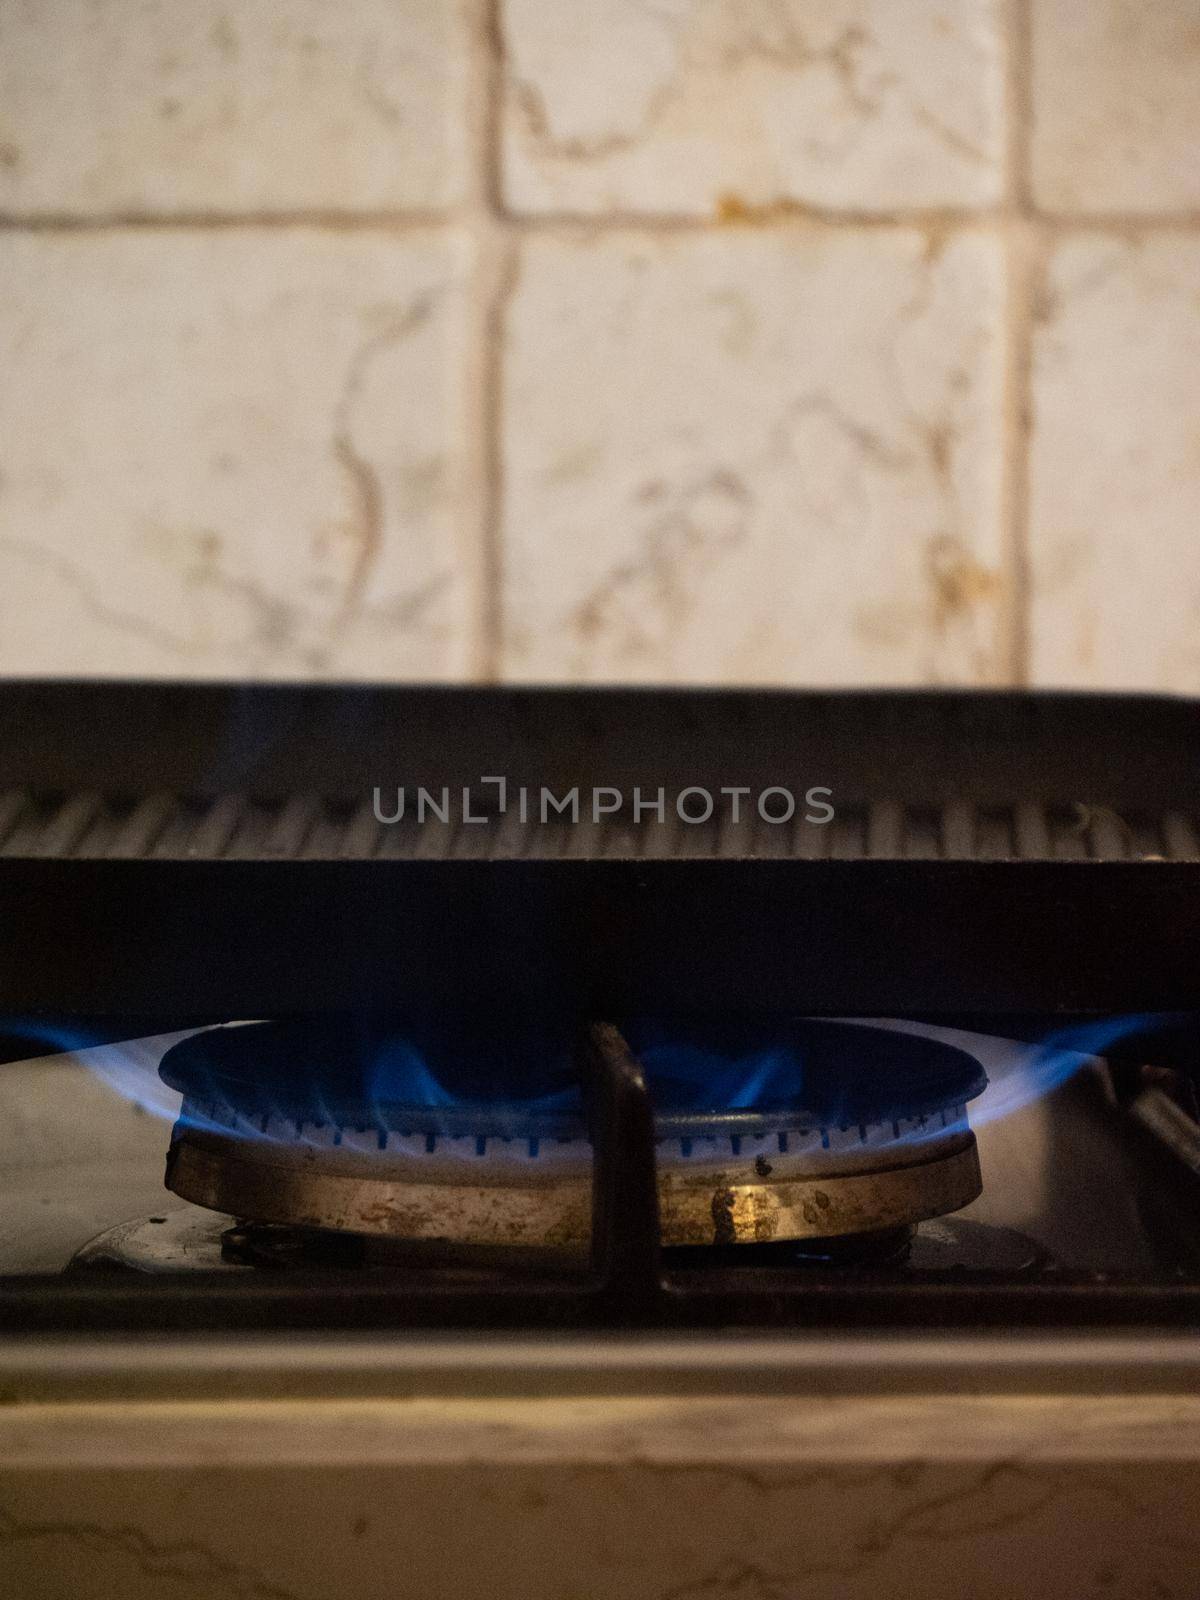 heating a grill above the fire in the kitchen by verbano